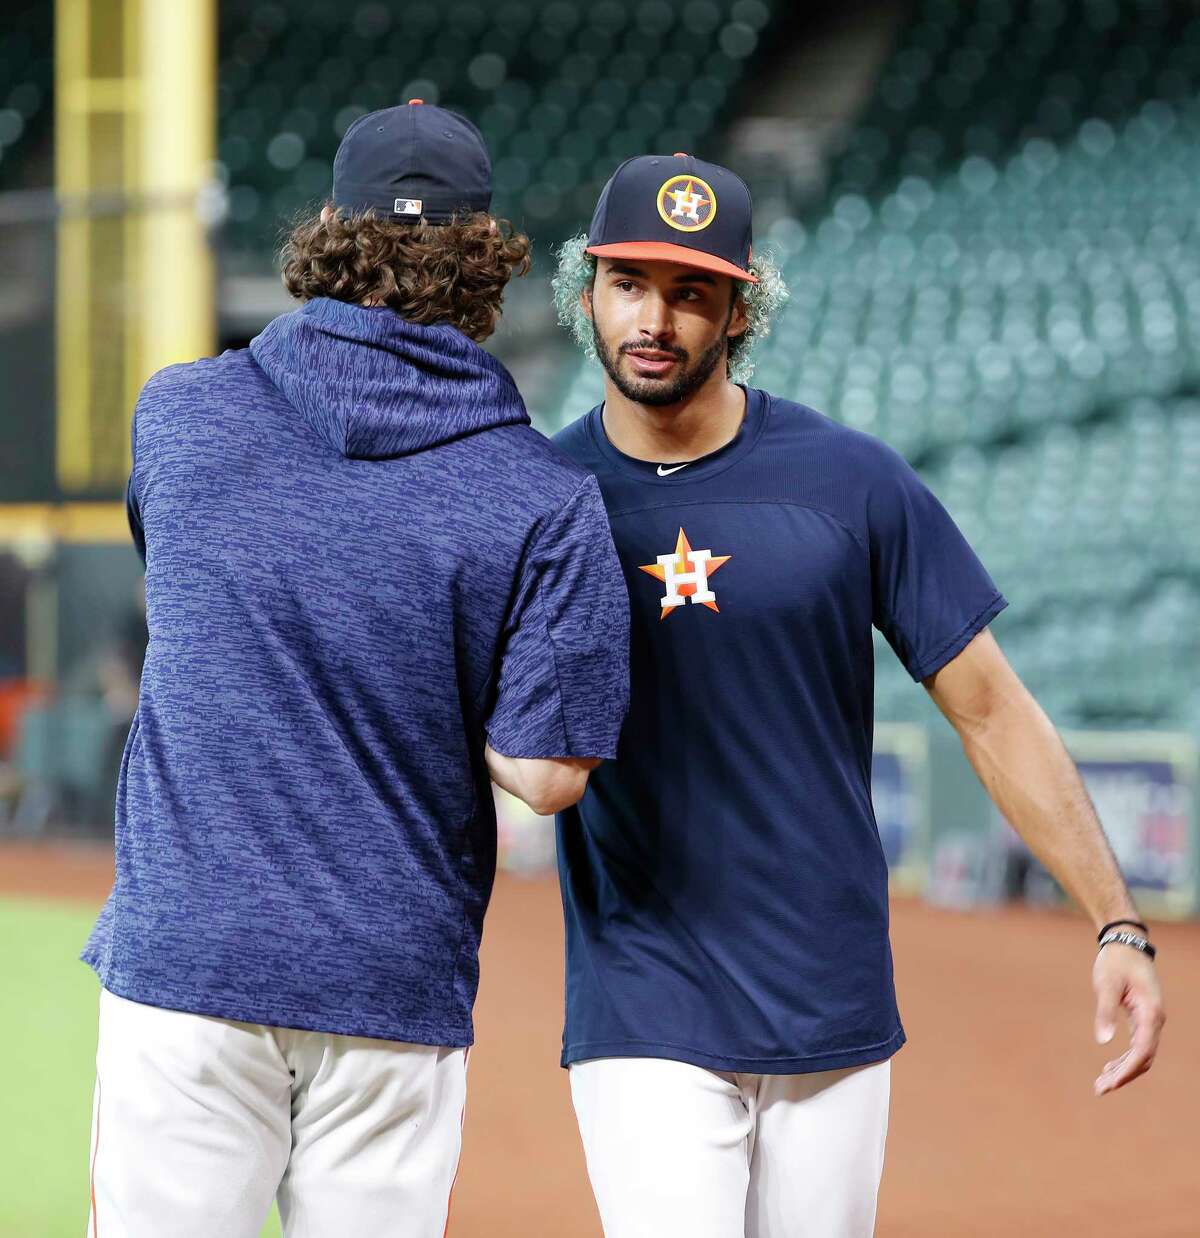 Dante Pettis, son of Houston Astros third base coach Gary Pettis, who was the second round draft pick for the San Francisco 49ers greets pitcher Gerrit Cole during batting practice before the start of an MLB game at Minute Maid Park, Tuesday, August 14, 2018, in Houston.